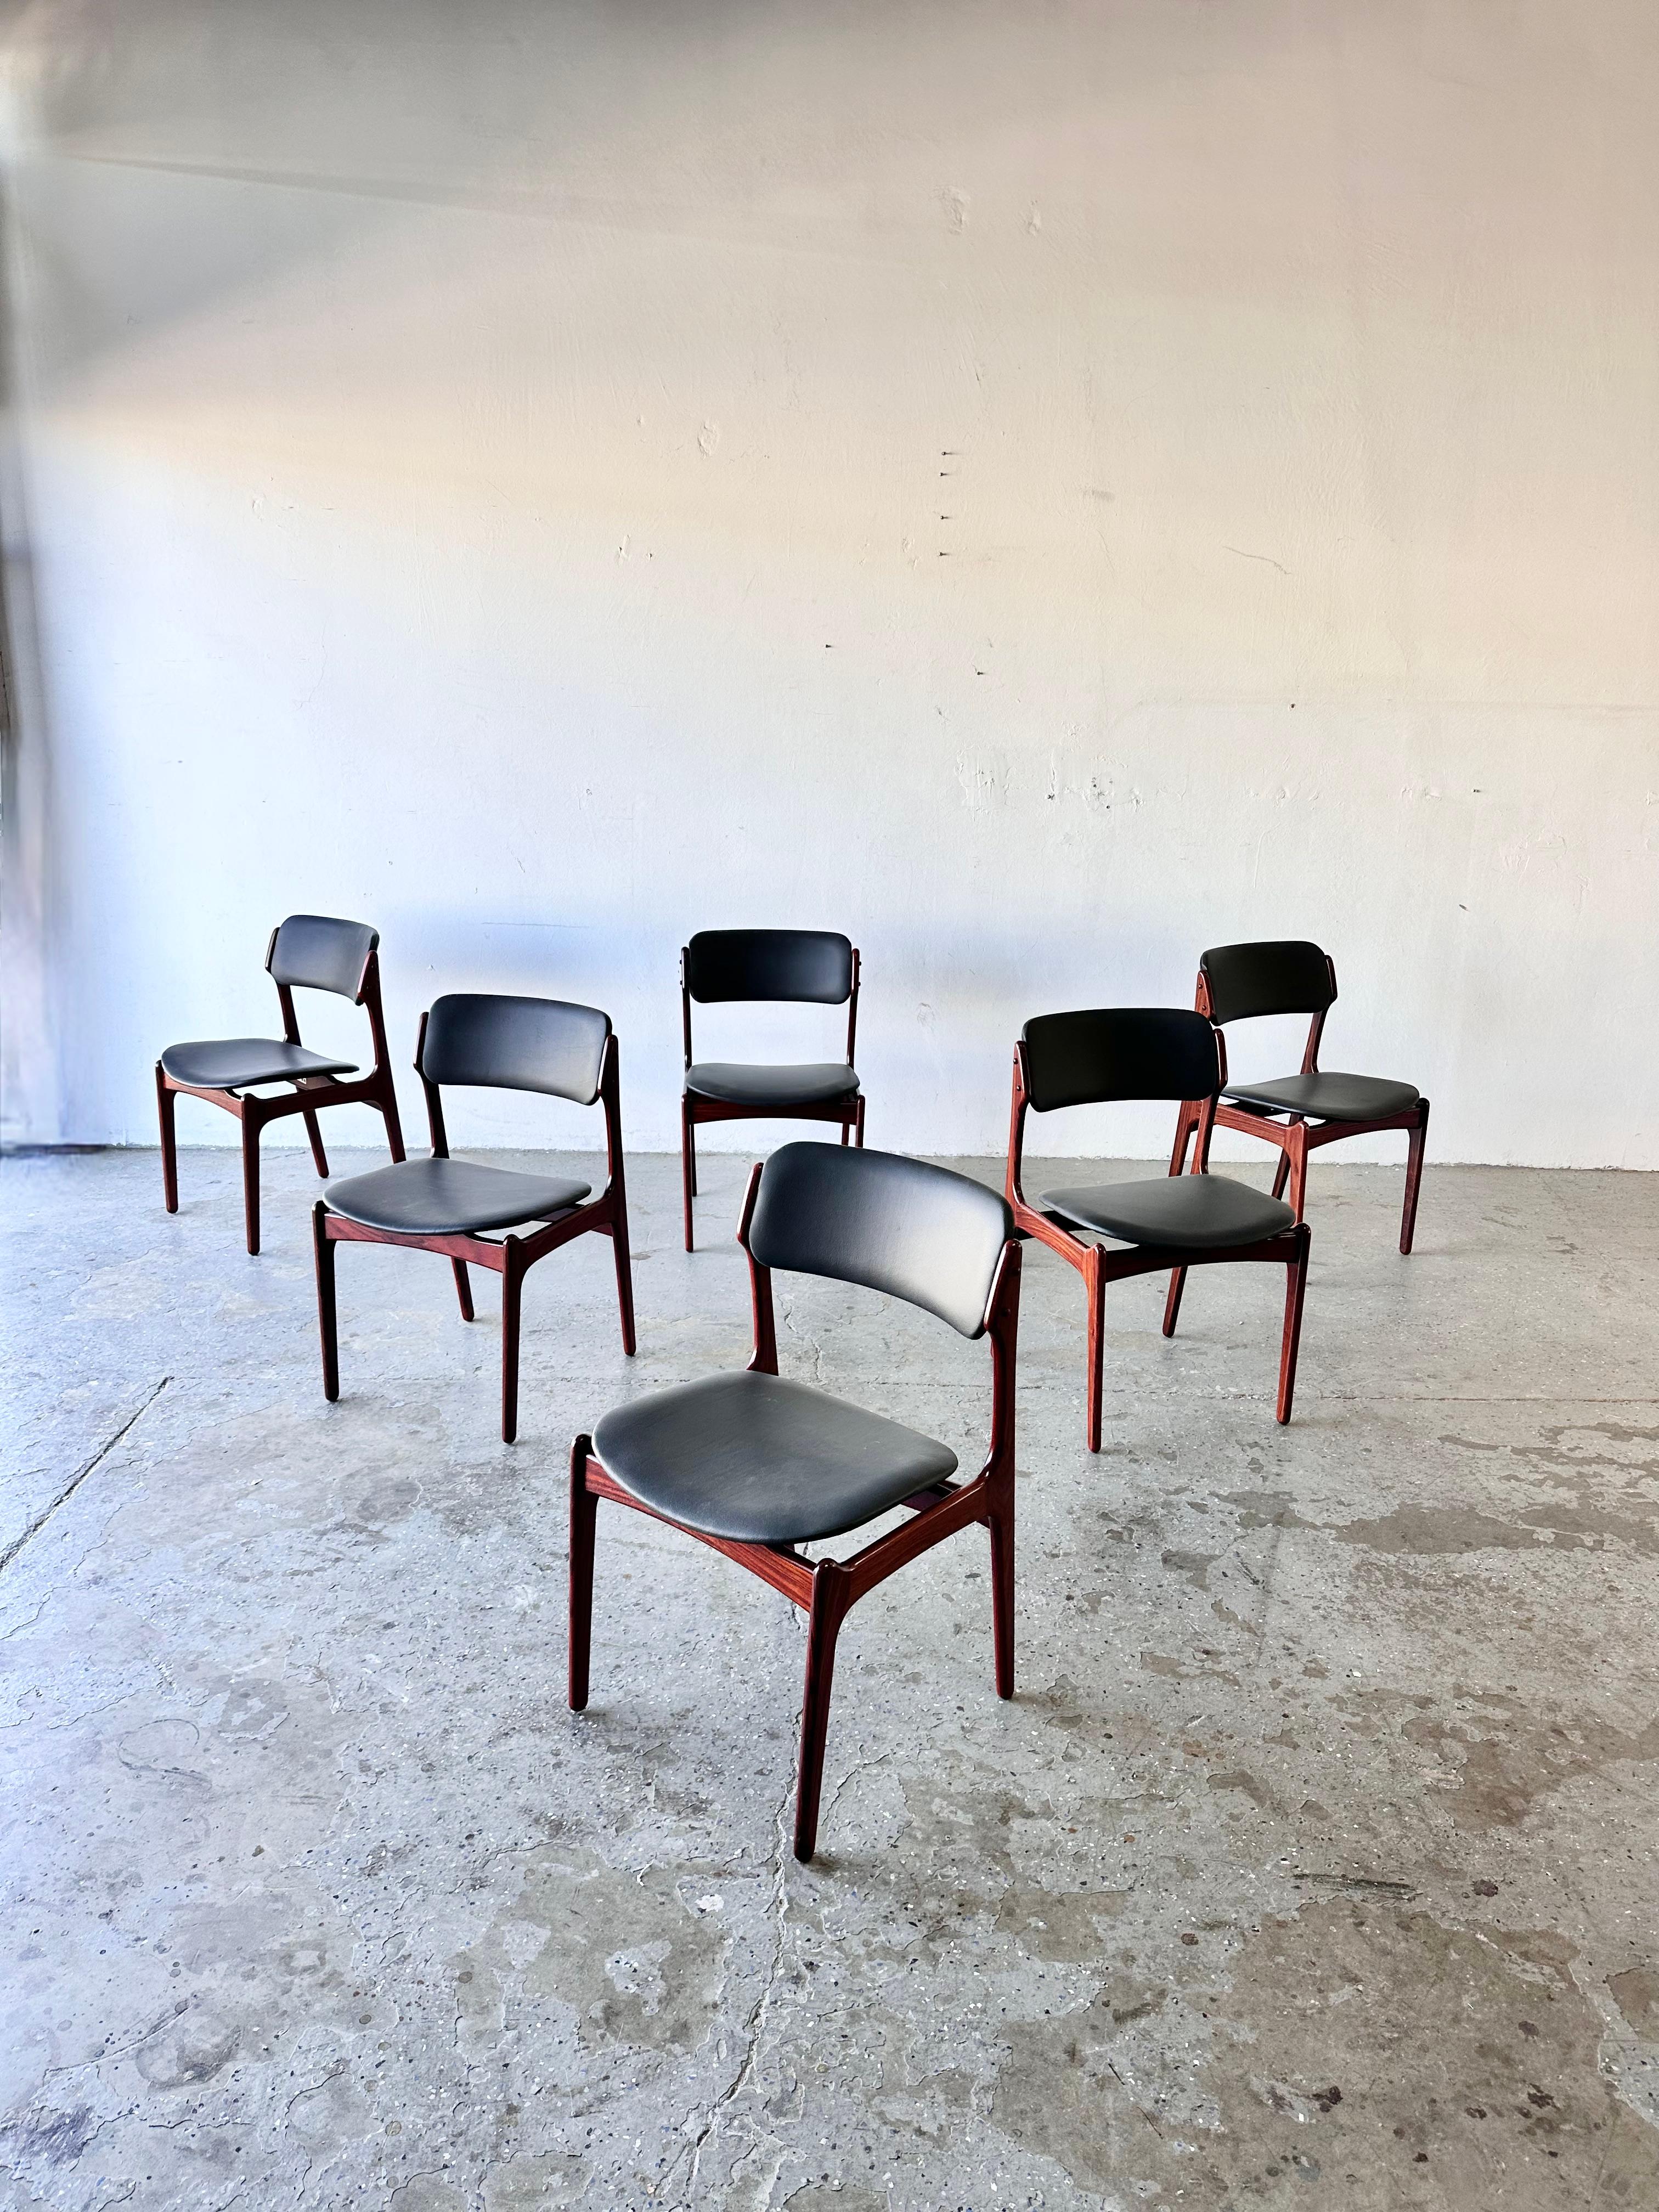 Set of  6 Model 49 Rosewood Dining Chairs by Erik Buch for Oddense Maskinsnedkeri / O.D. Møbler
This set of six dining room chairs in rosewood and black leather was designed by Erik Buch and made by Odense Mobelfabriek in the 1960s. Chairs have been